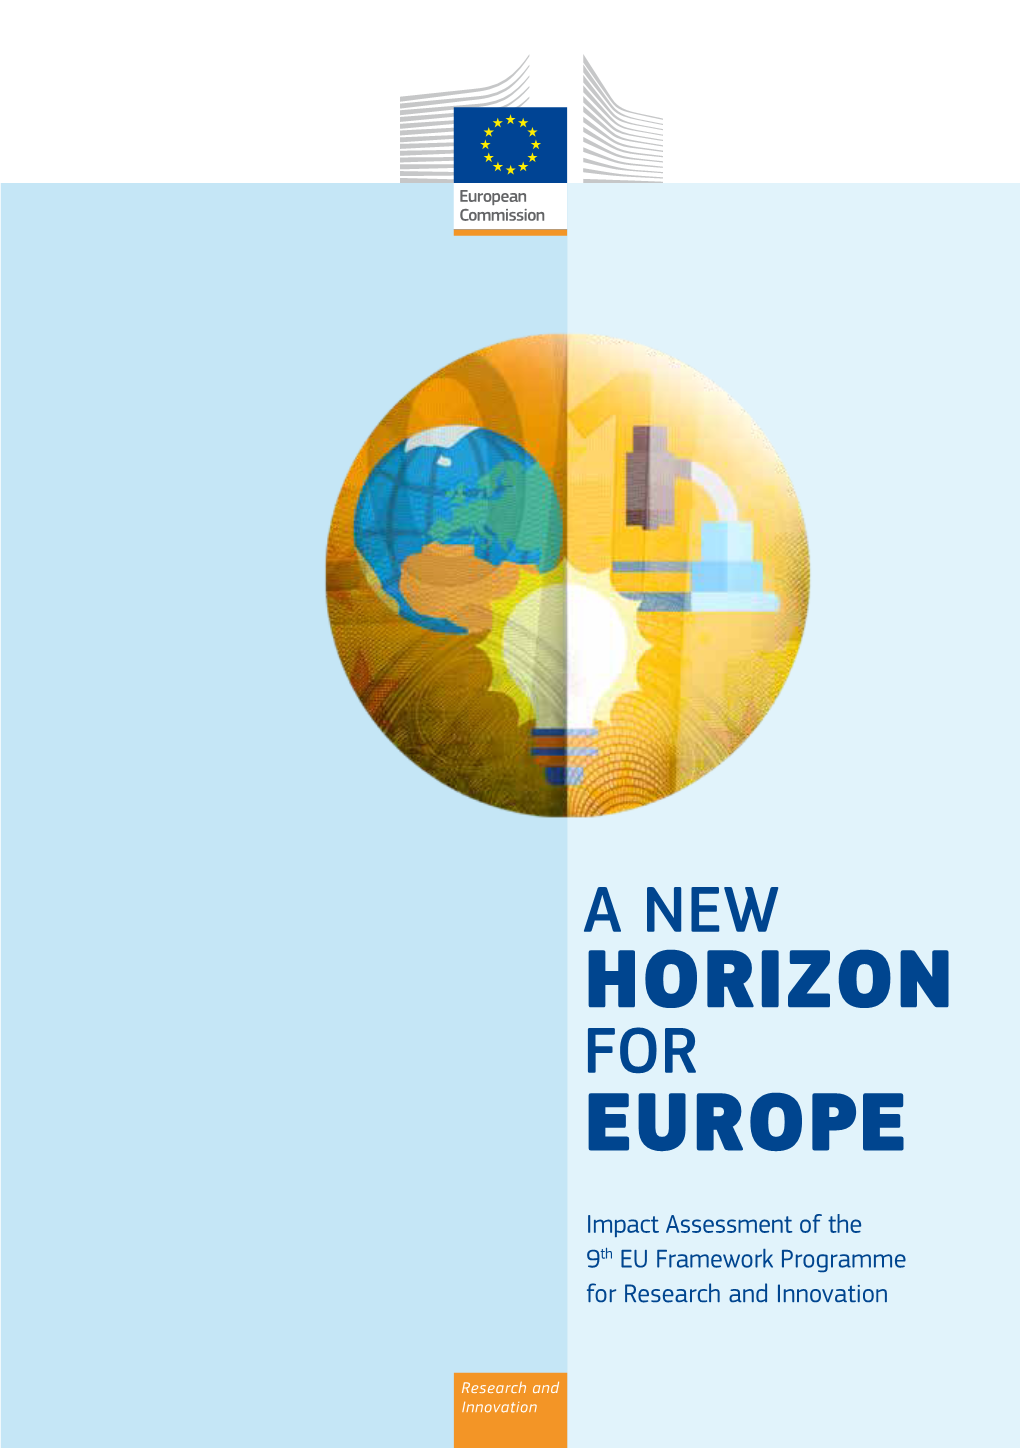 Horizon Europe Impact Assessment Has Been Slightly Condensed and Reformatted Compared to the Official Version (SWD(2018) 307 Final) That Was Published on 7 June 2018